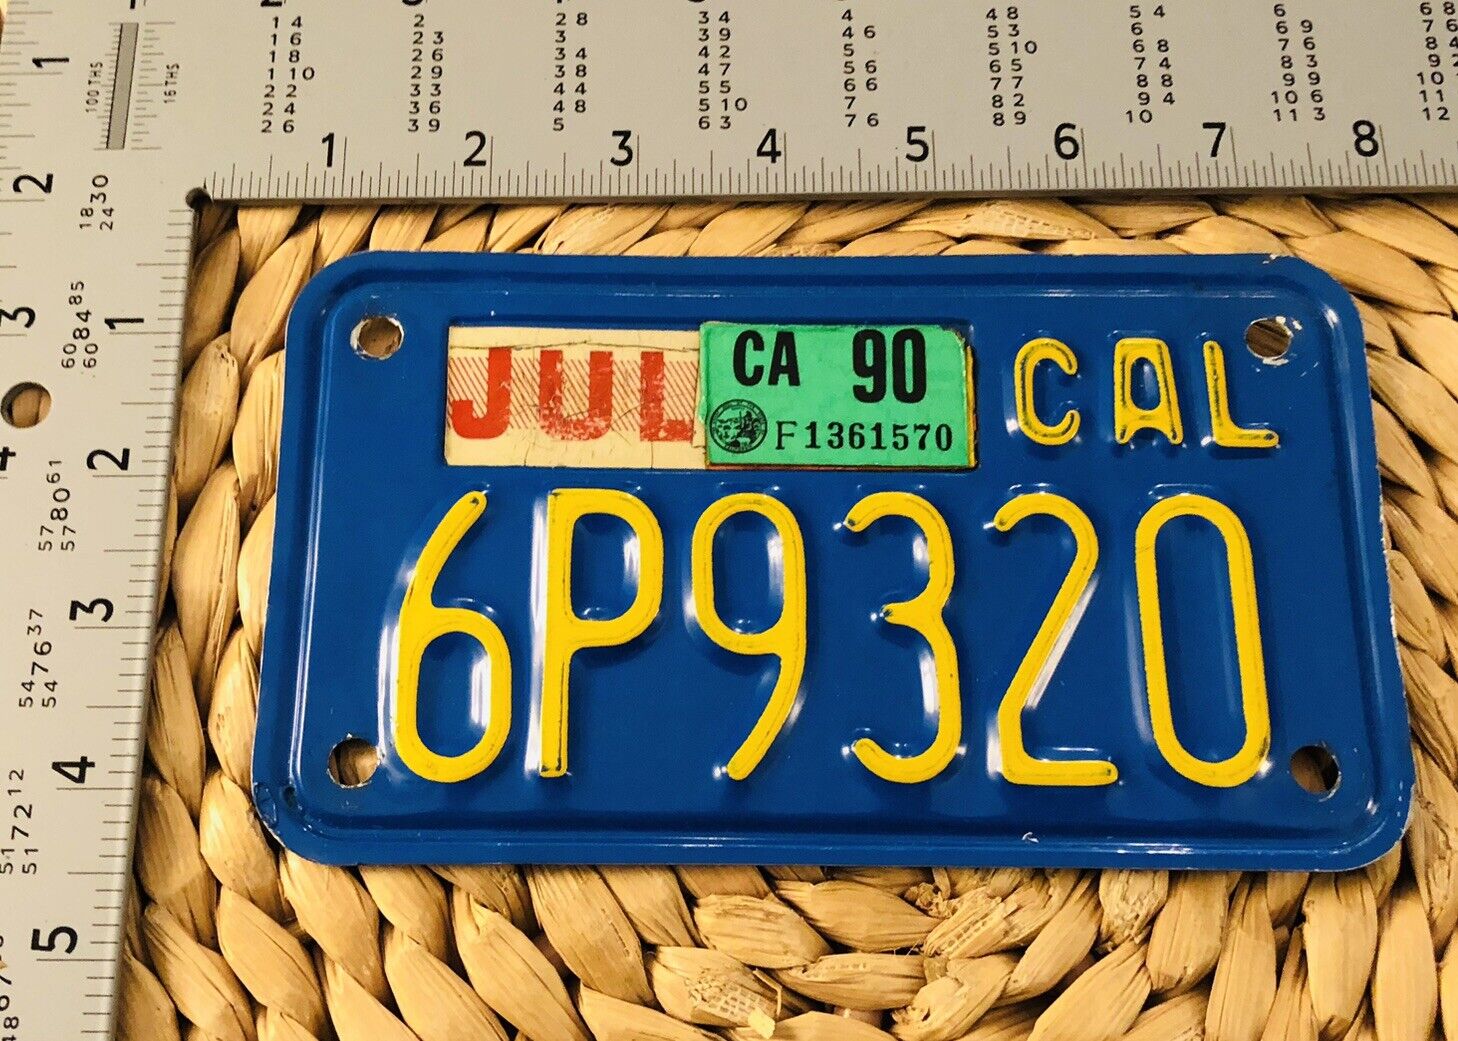 1970 To 1987 1990 California MOTORCYCLE License Plate Harley BMW Indian 6P9320